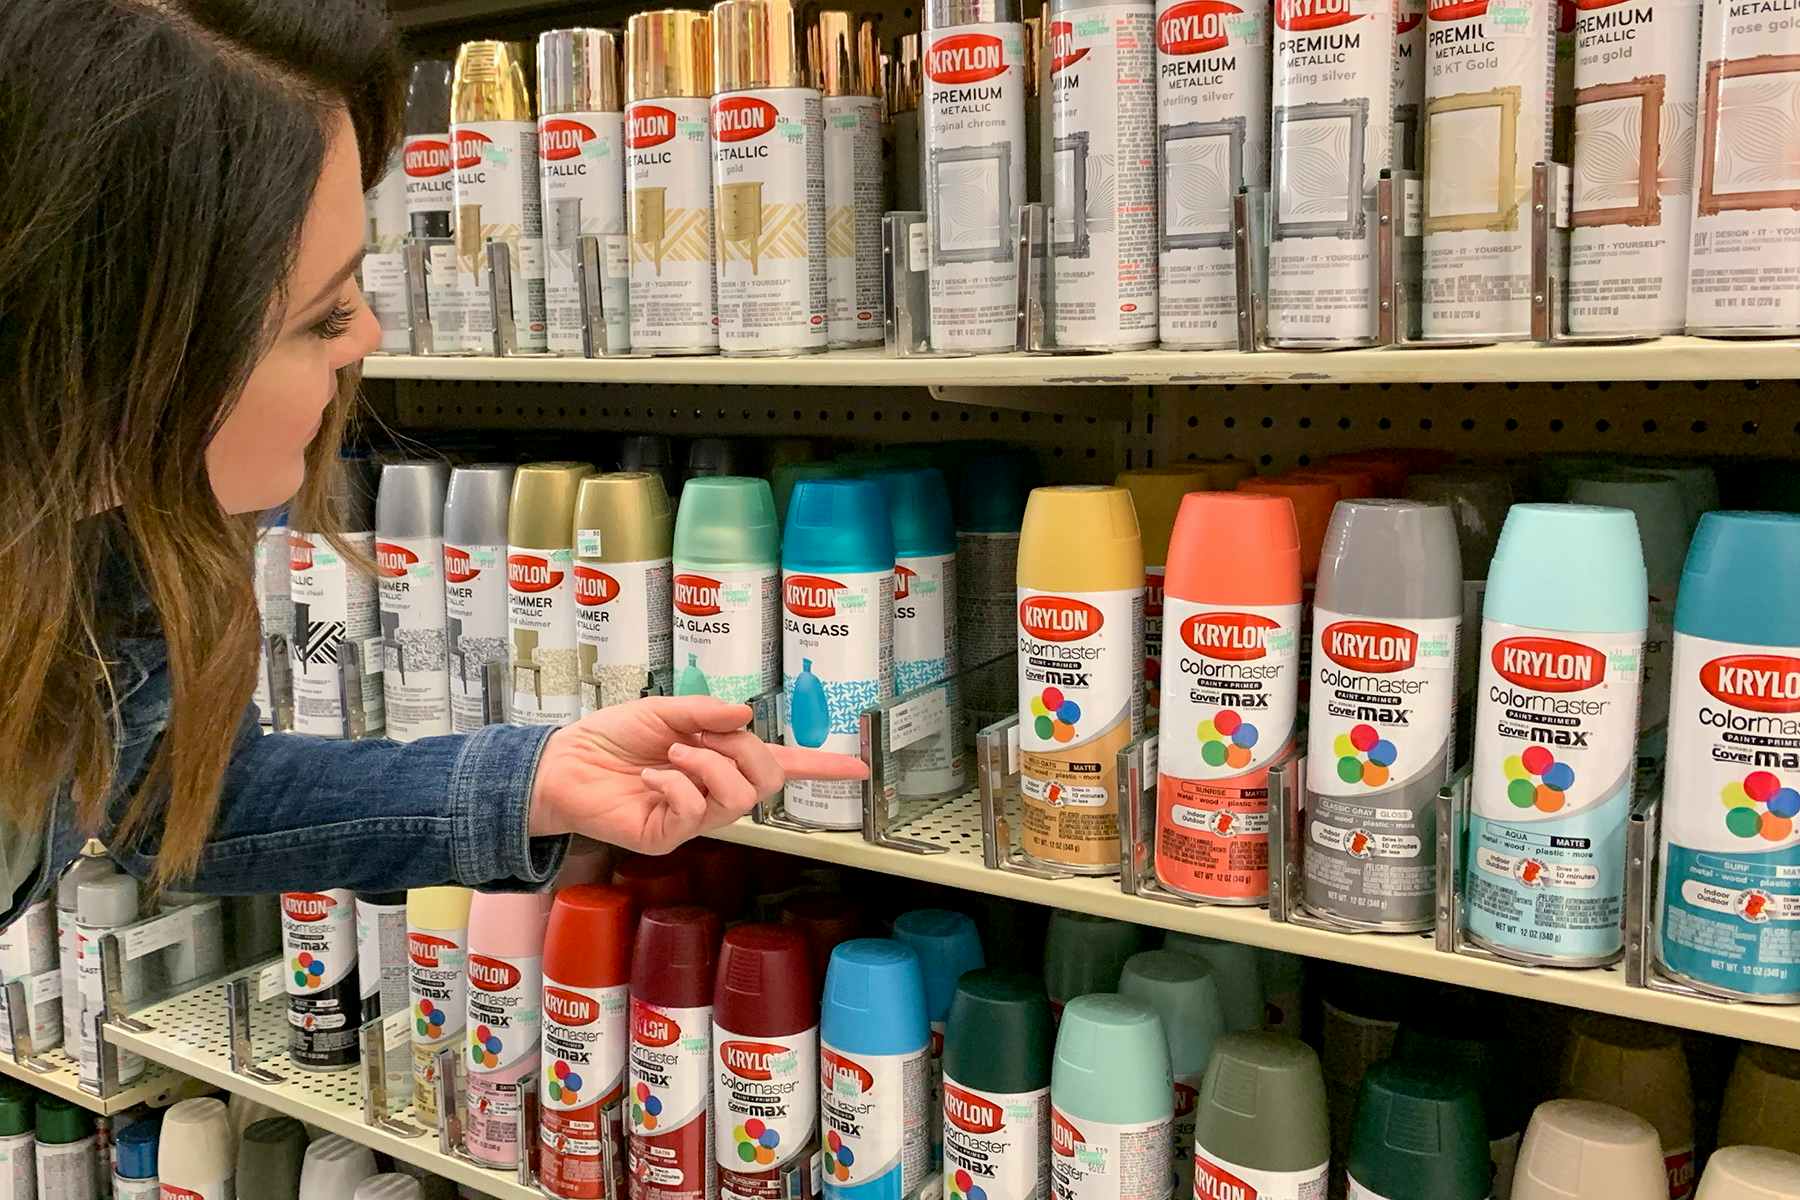 A woman pointing out an empty shelf of Krylon spray paint at Hobby Lobby.